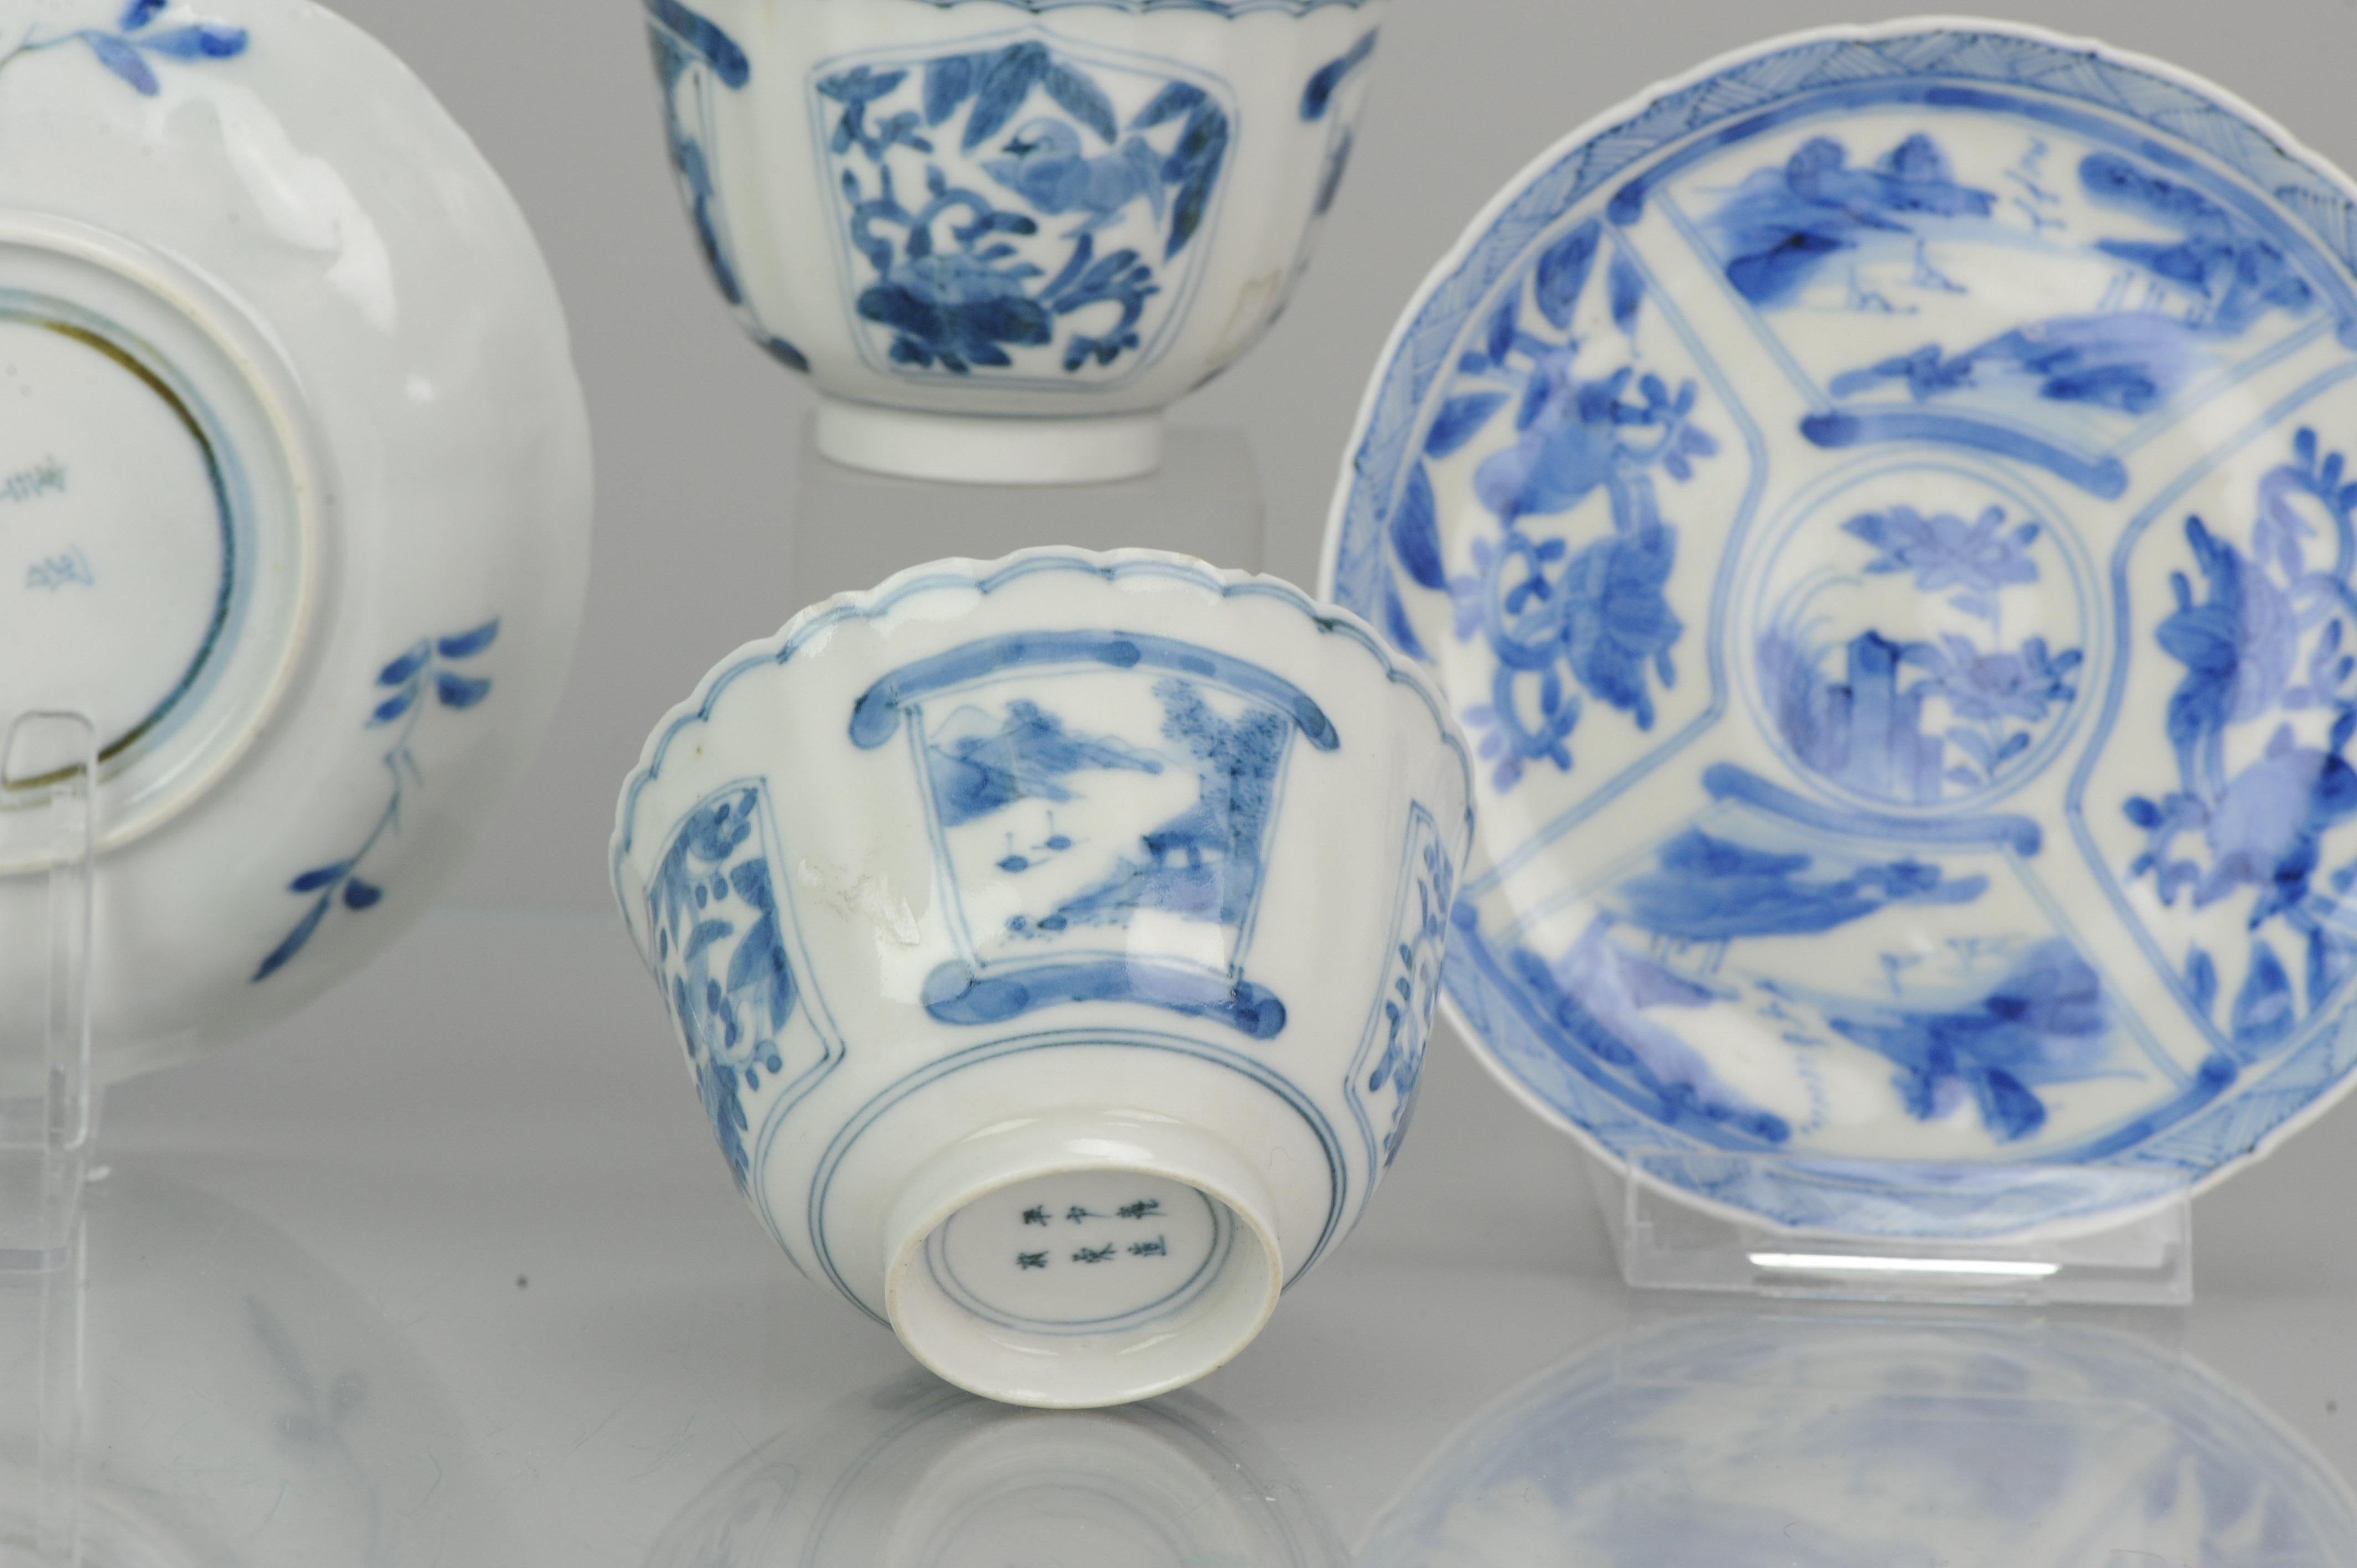 Pair Antique Meiji Porcelain Kangxi Revival Japanese Tea Bowls, 19th Century In Good Condition For Sale In Amsterdam, Noord Holland